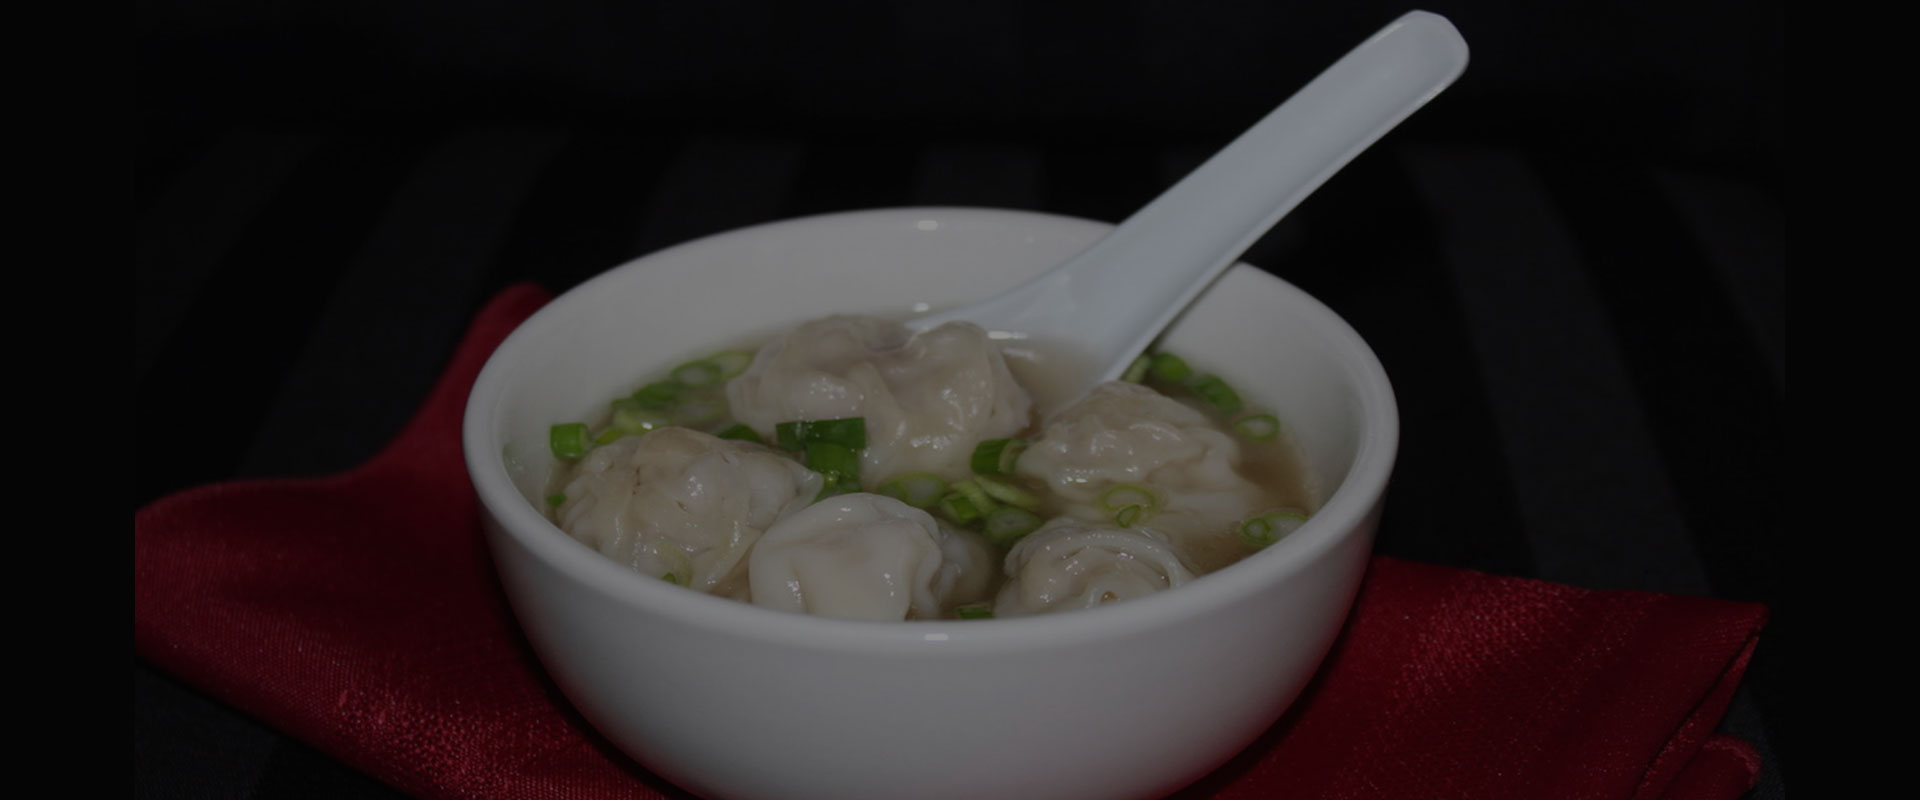 Try Our New Wonton Soup